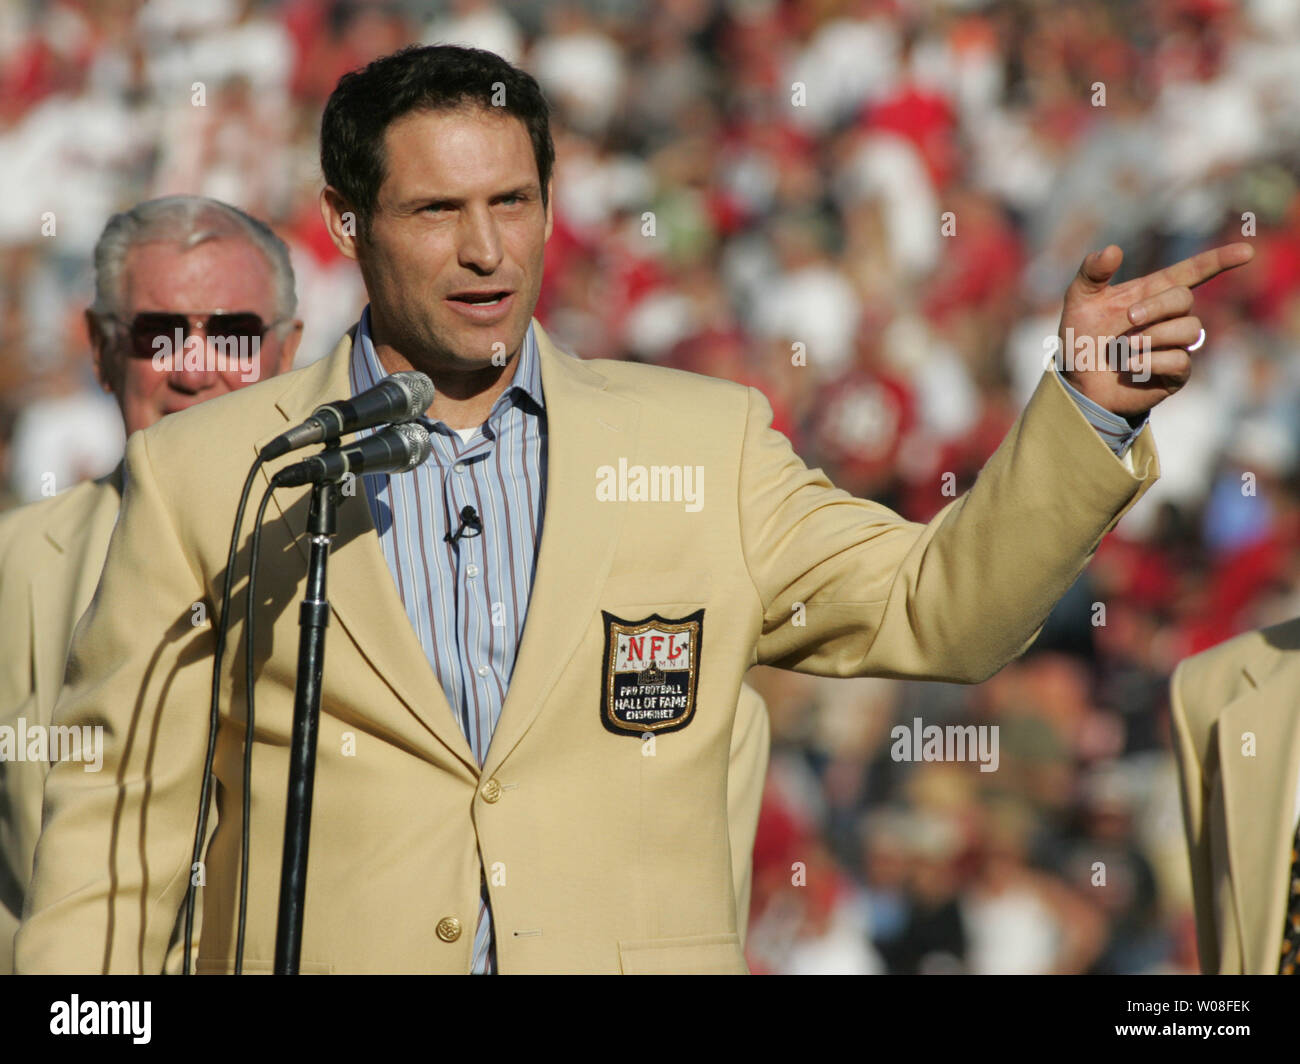 Hall of Fame QB Steve Young speaks at Monster Park in San Francisco on November 20, 2005. Young was honored as a new enshrinee to the Hall.  (UPI Photo/Terry Schmitt) Stock Photo